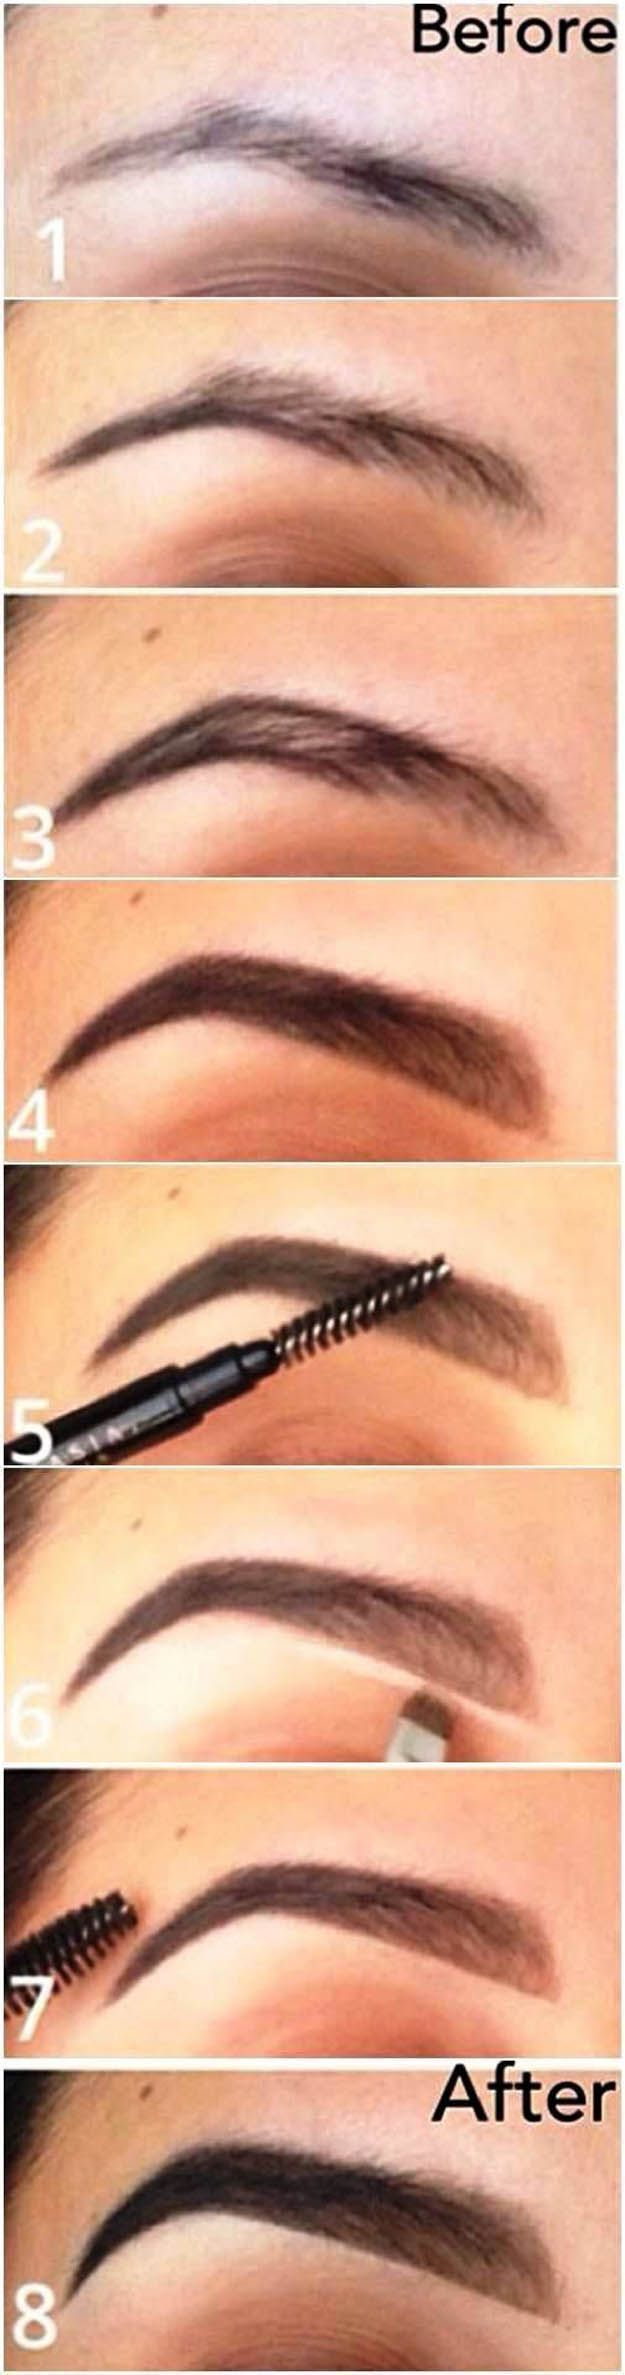 How to Fill in Your Brows | Eyebrow Makeup Tutorials for Beginners by Makeup Tut...